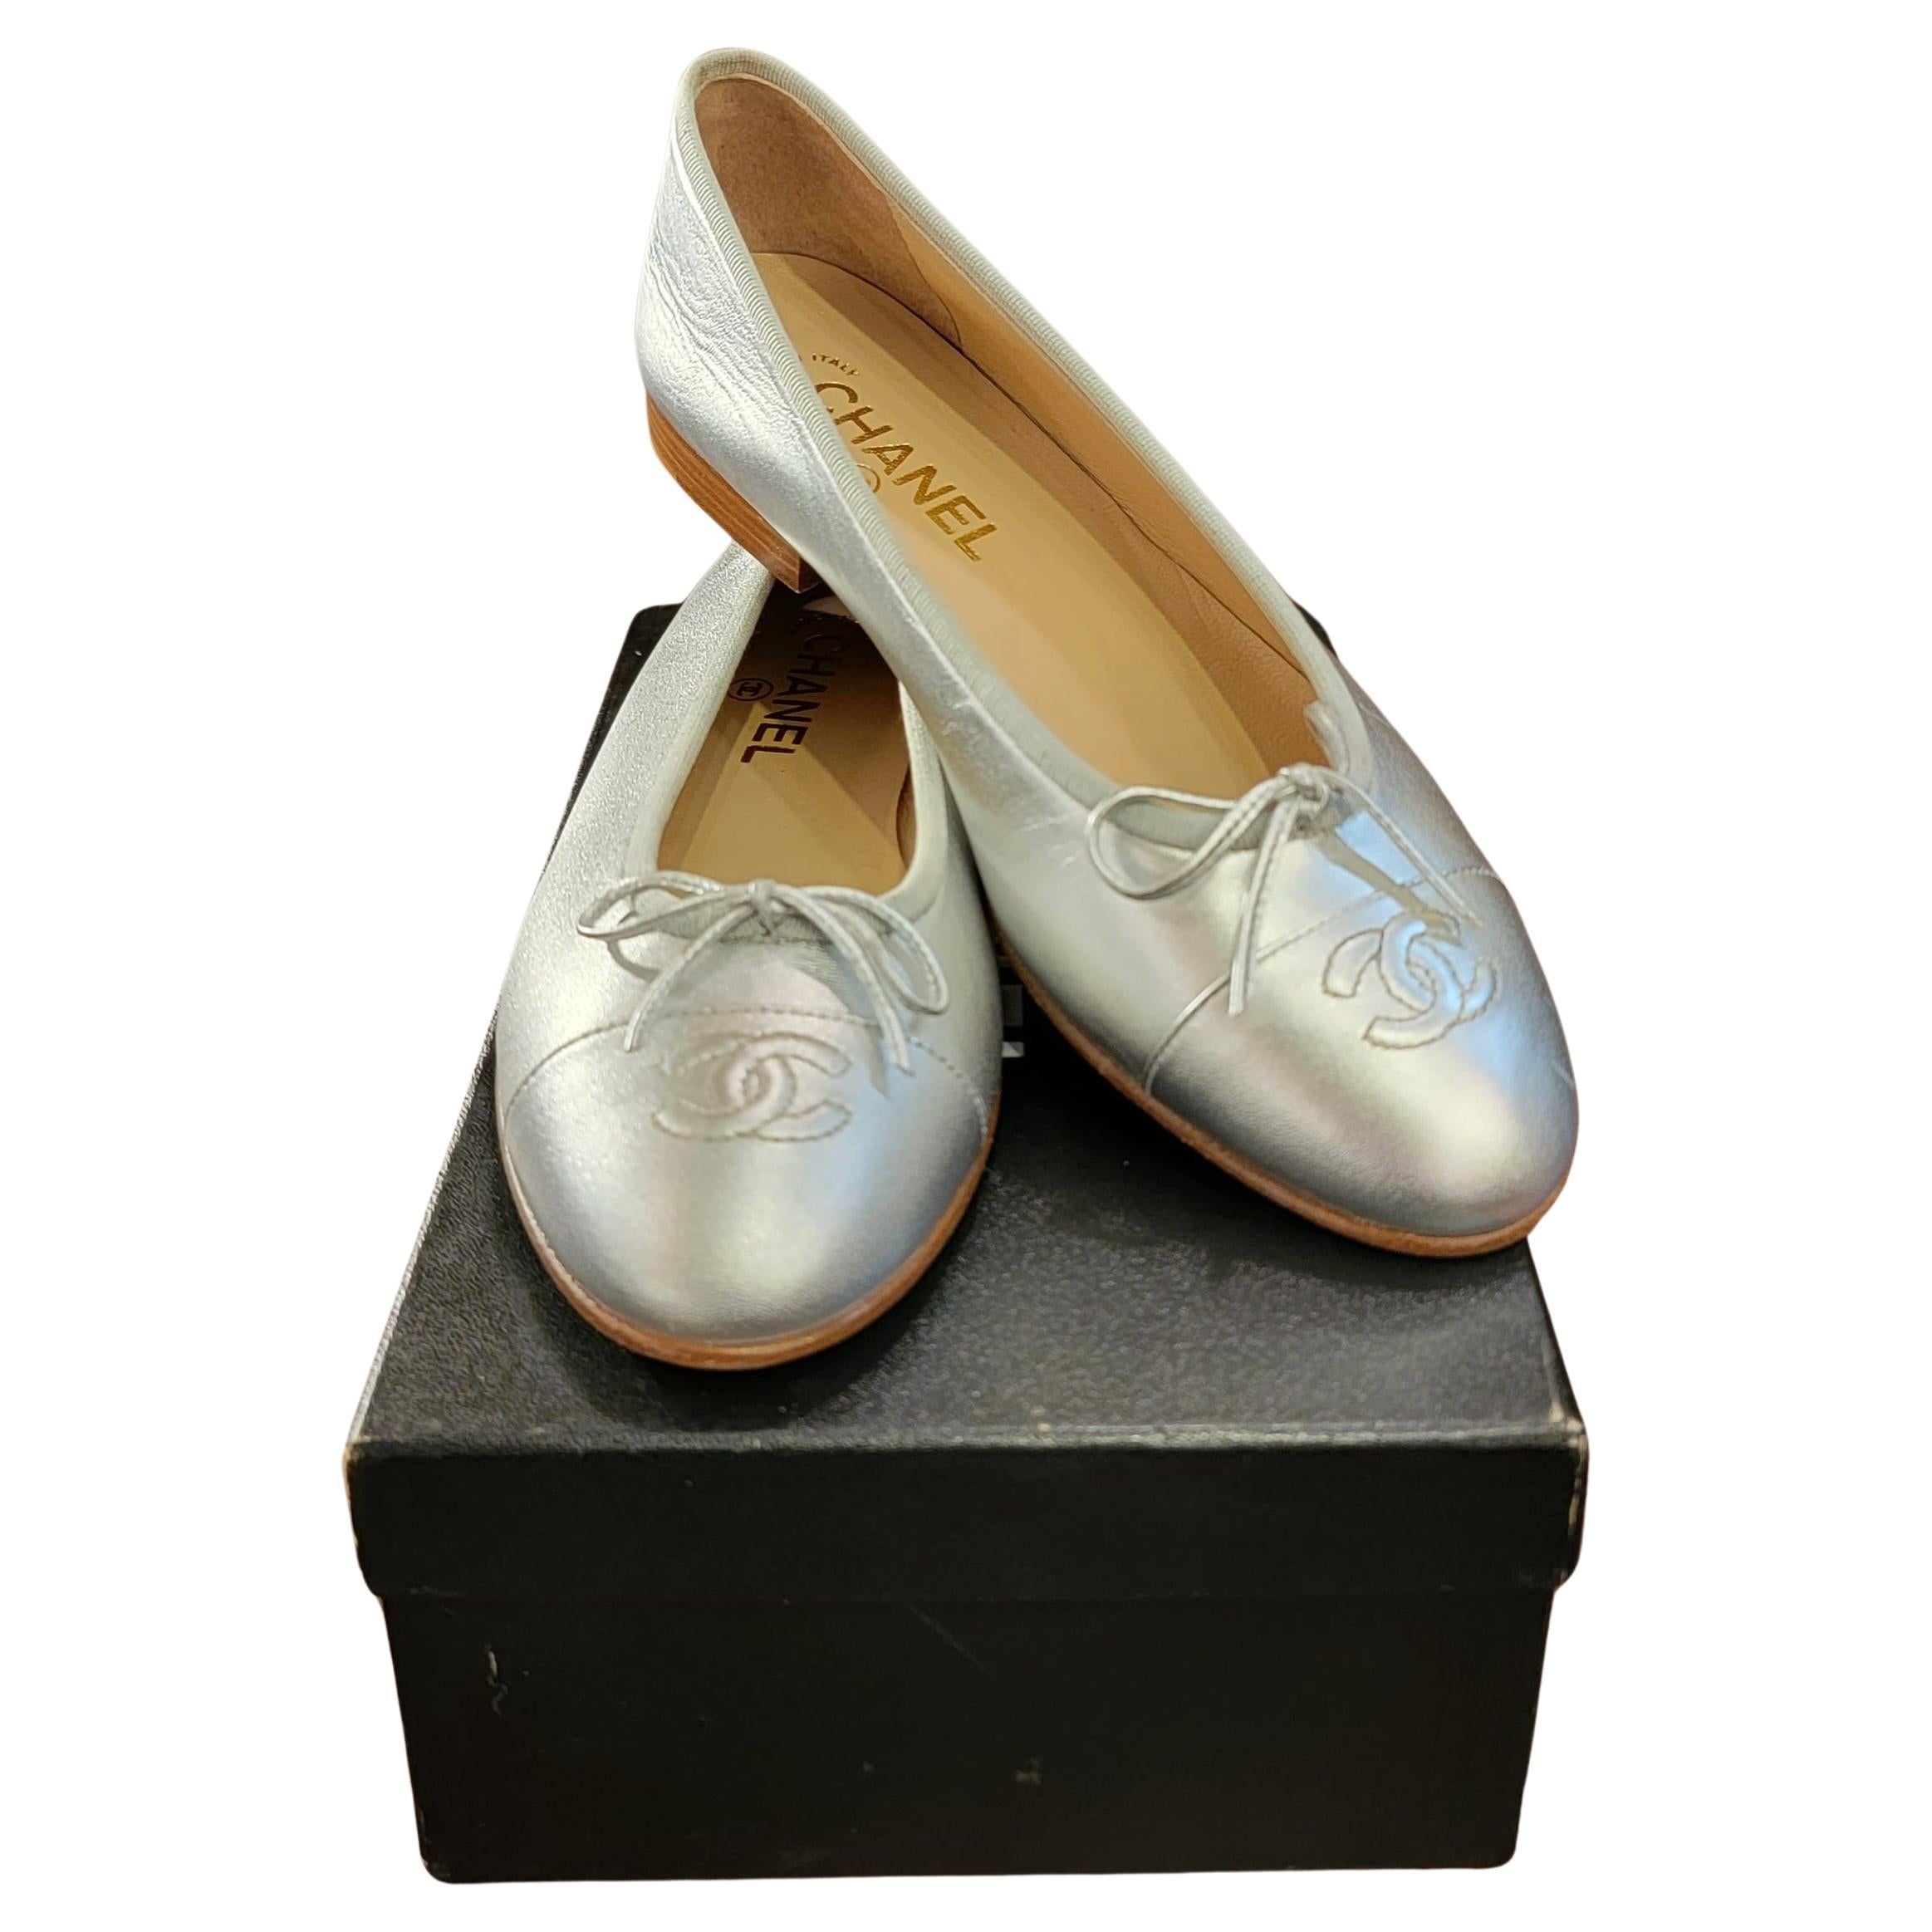 CHANEL, Shoes, Chanel Brown Ballet Flats With Silver Metal Toe Size 39